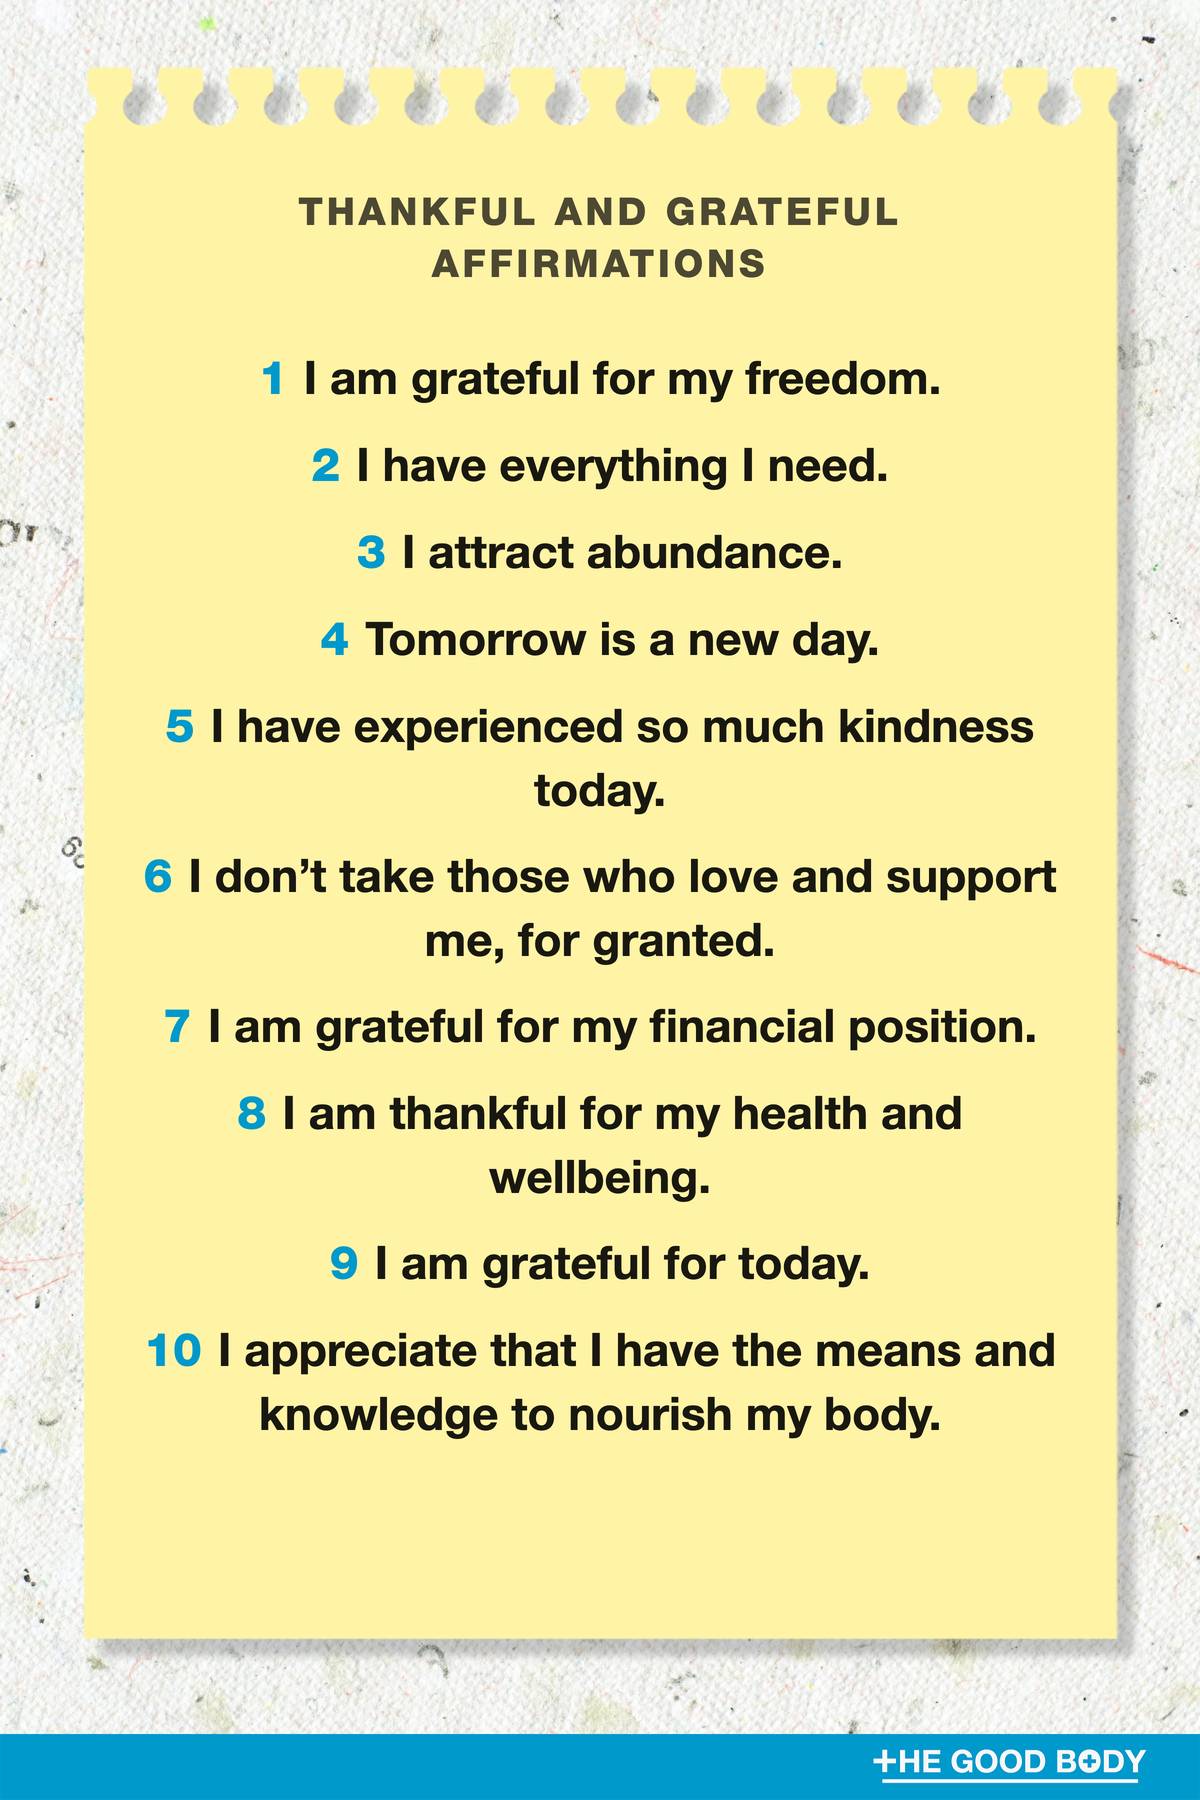 10 Thankful and Grateful Affirmations on Yellow Note Paper with Craft Paper Background